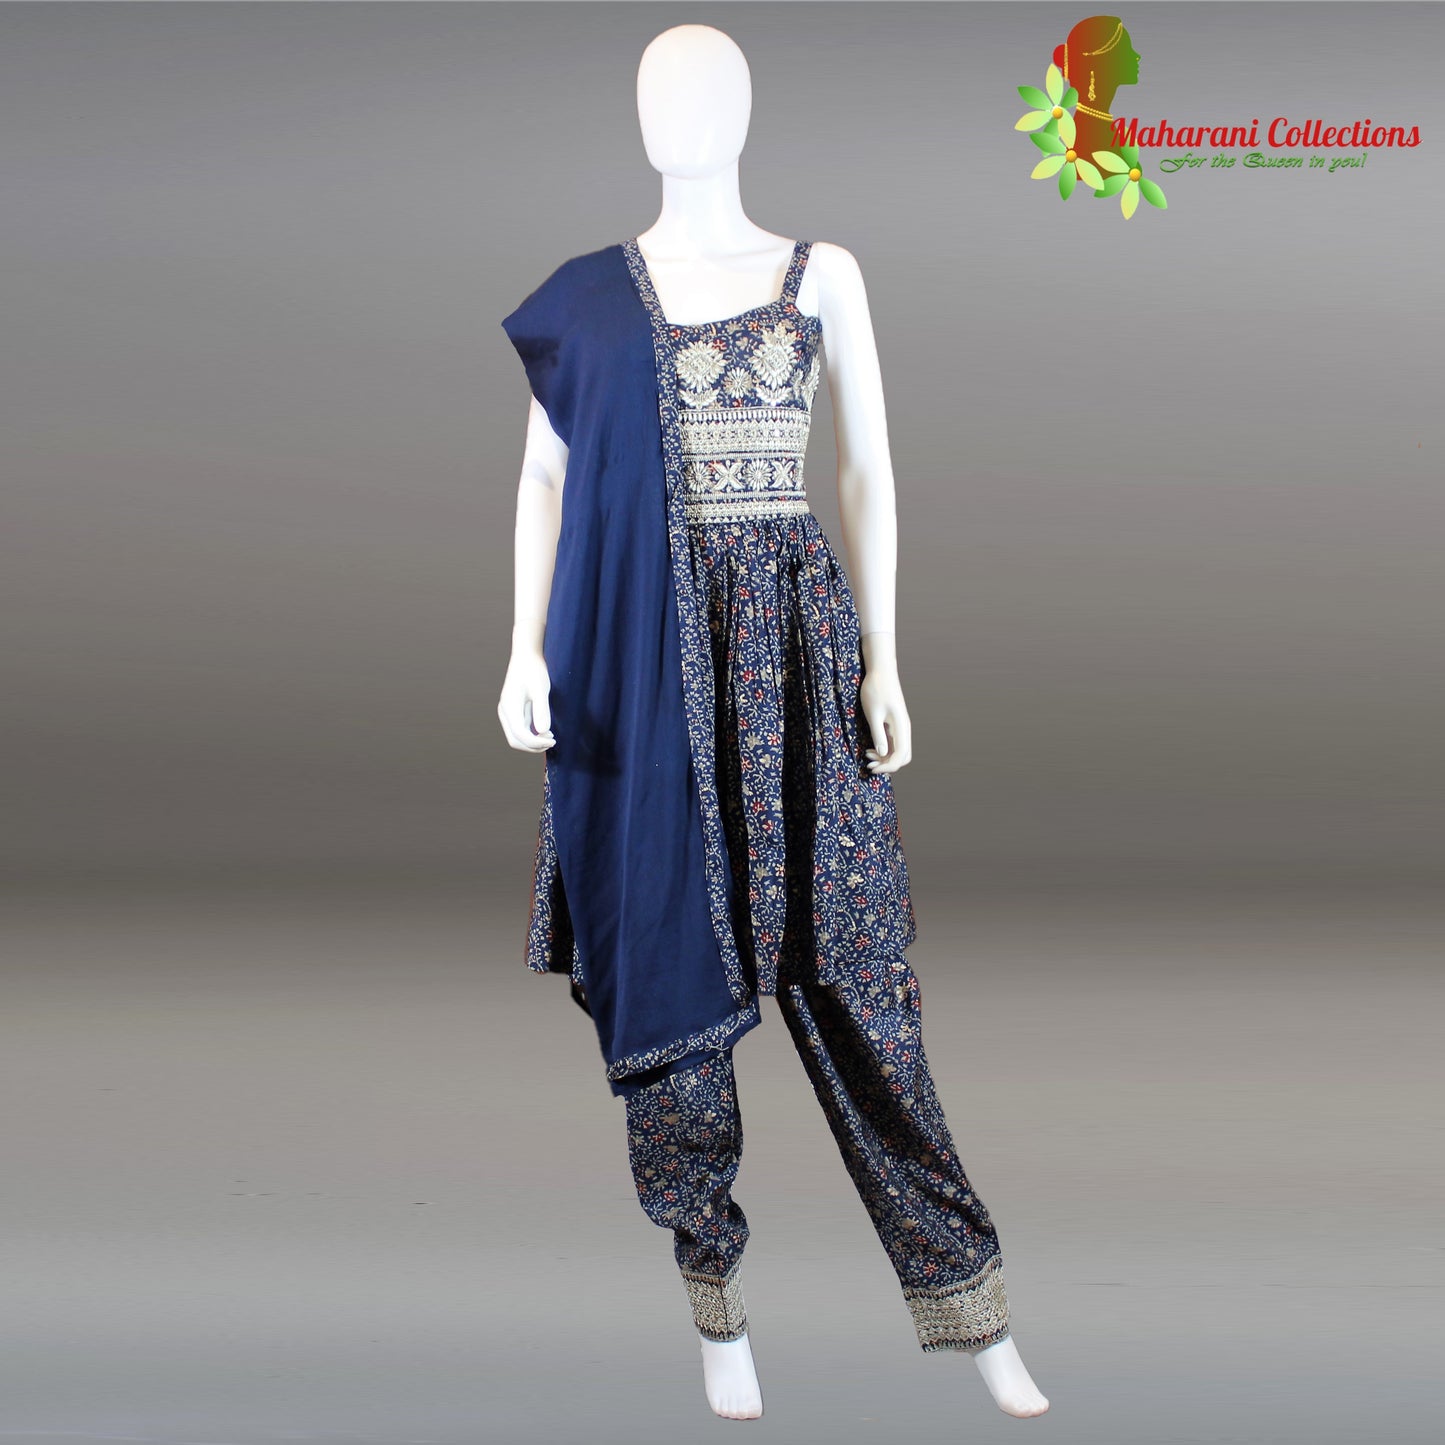 Maharani's Suit with Pants and Dupatta - Royal Blue (S) - Pure Muslin Silk